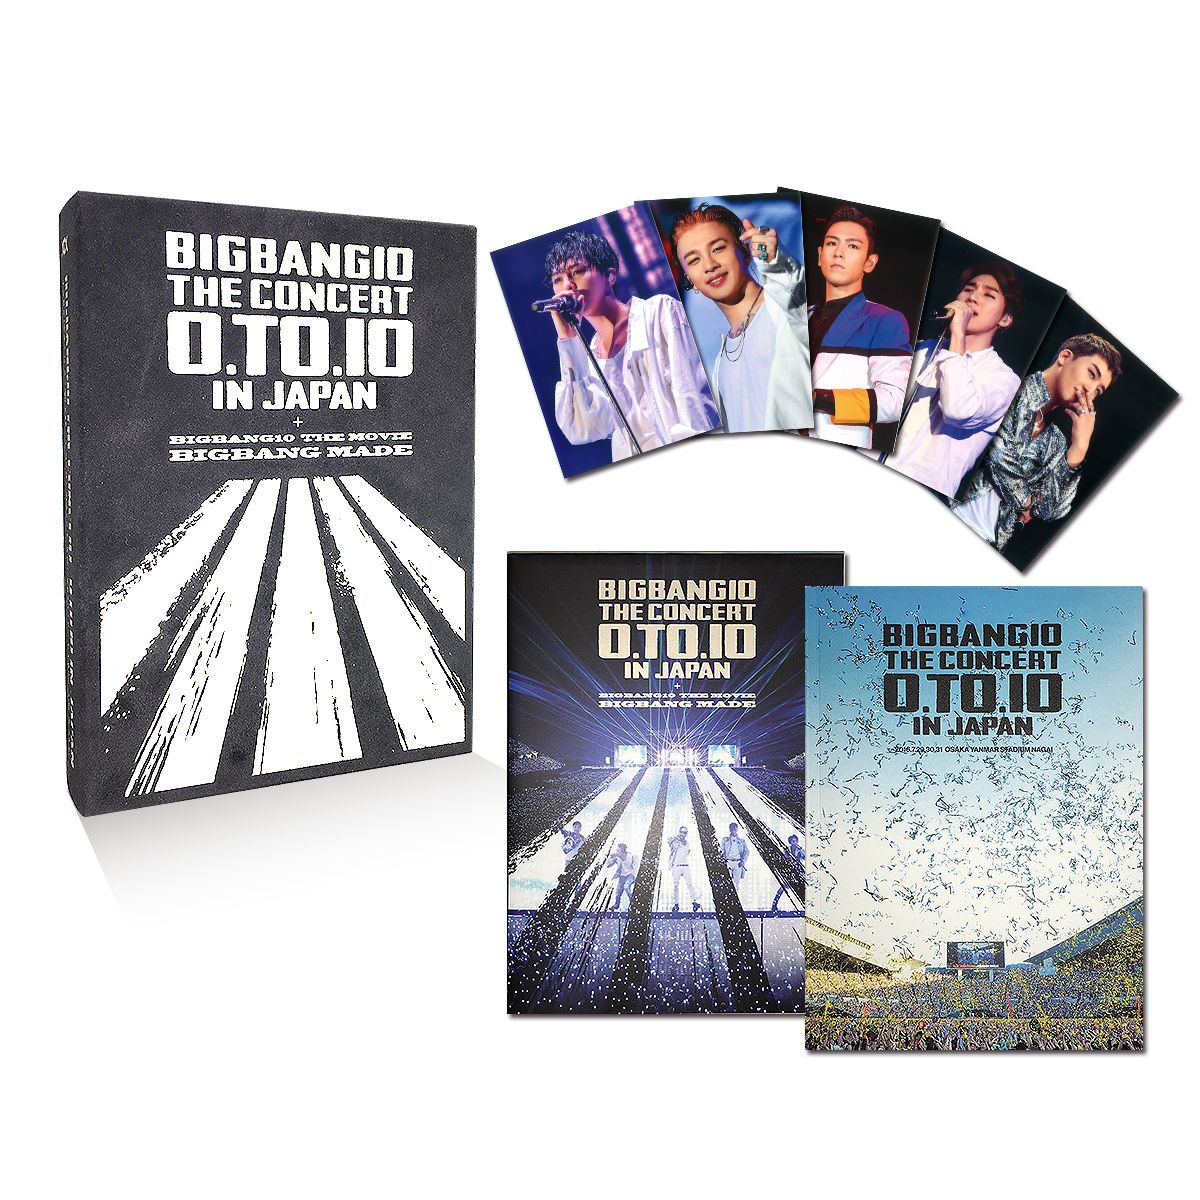 BIGBANG10 THE CONCERT : 0.TO.10 IN JAPAN + BIGBANG10 THE MOVIE BIGBANG MADE[Blu-ray(3枚組)+LIVE CD(2枚組)+PHOTO BOOK+スマプラムービー&ミュージック] -DELUXE EDITION-(初回生産限定)画像